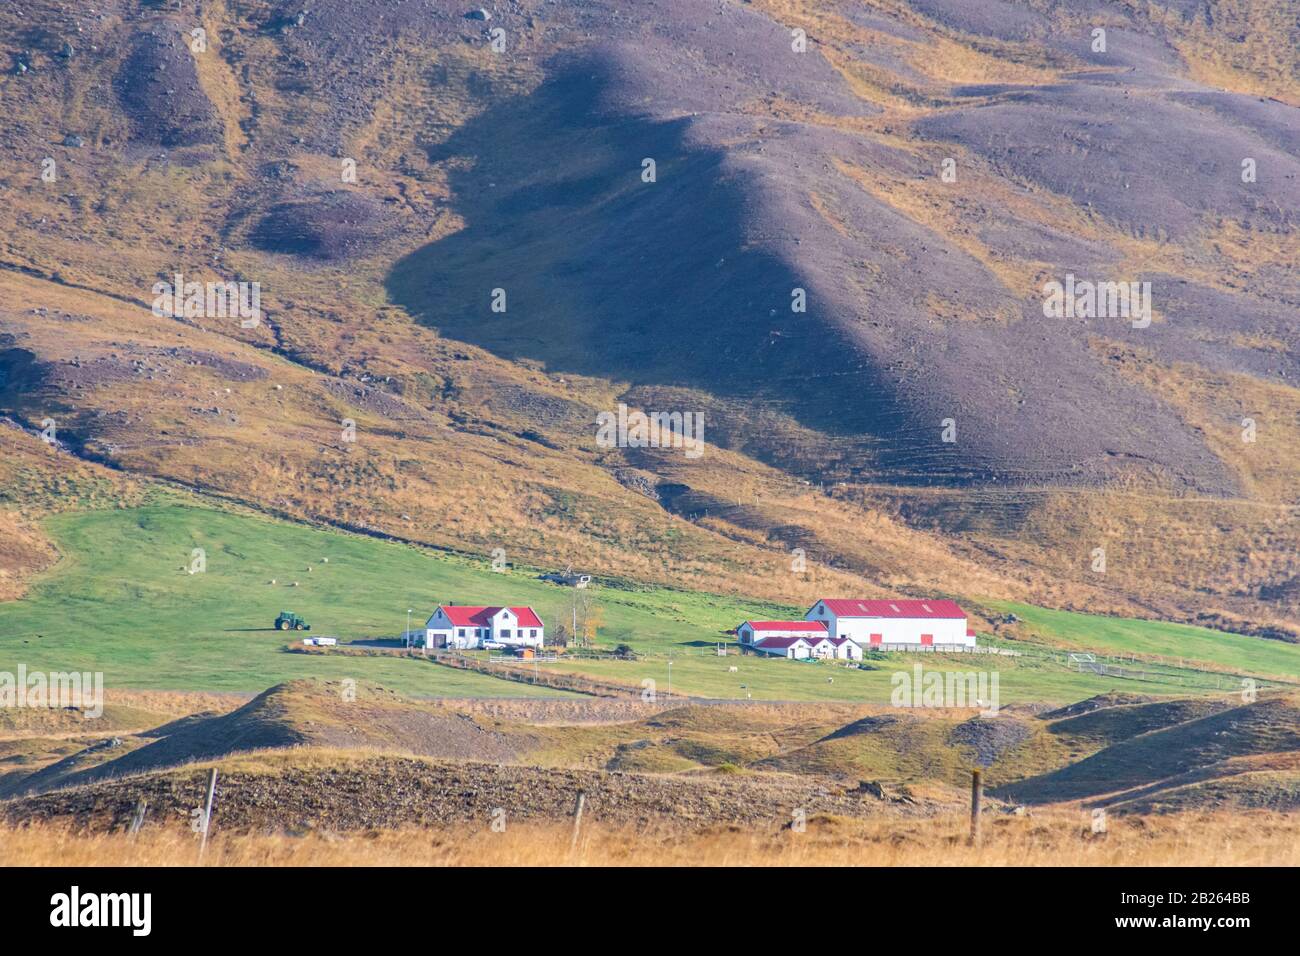 Northern Iceland farm based at the foot of a mountain slope during sunshine day Stock Photo